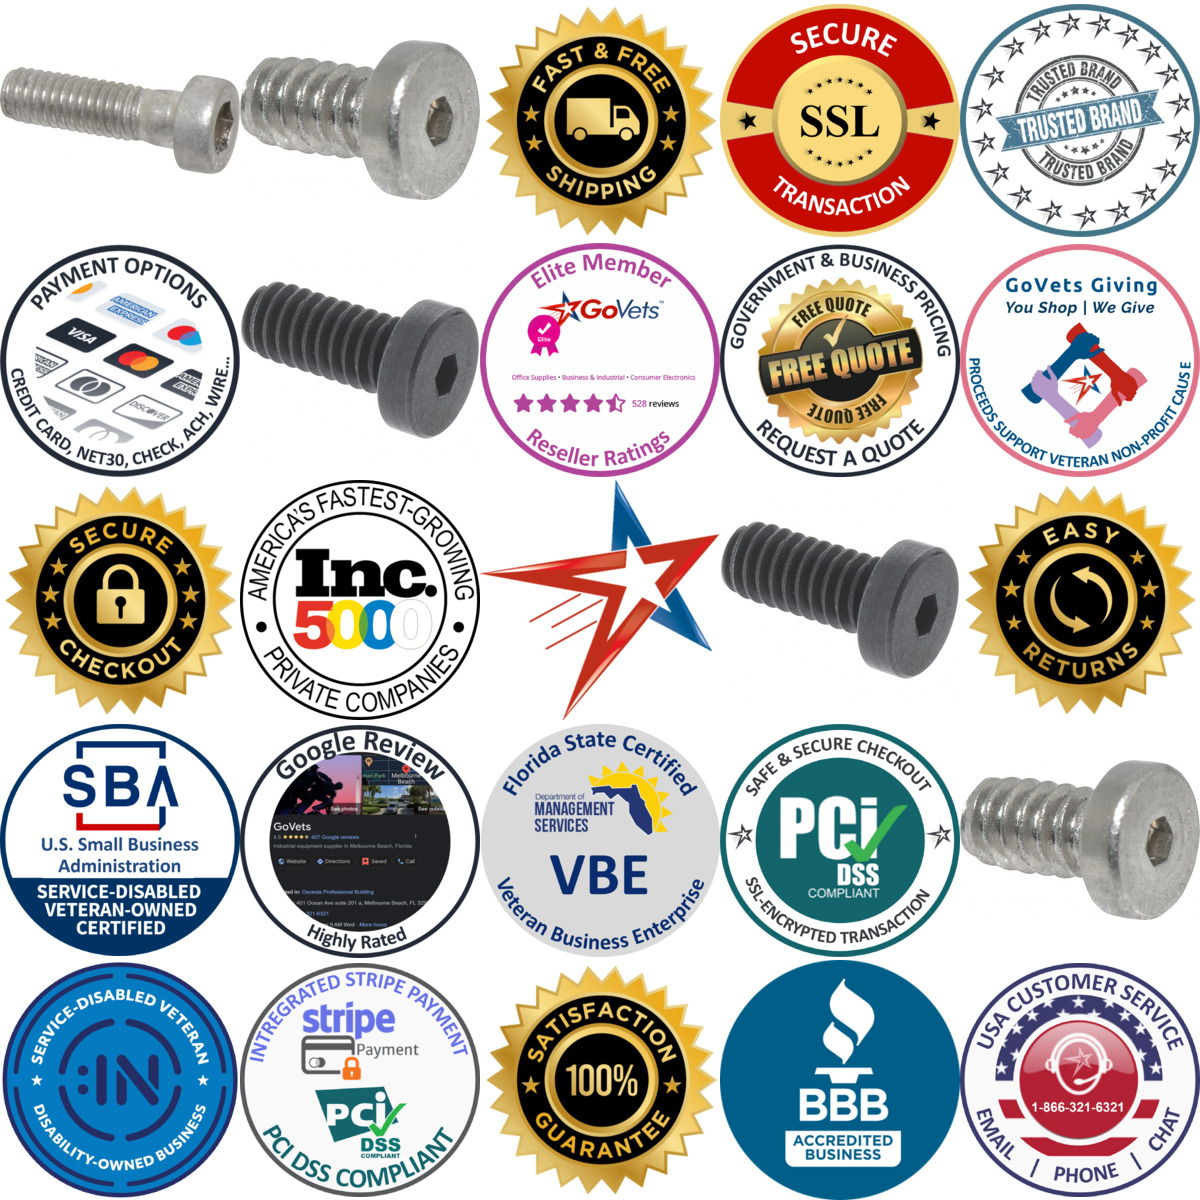 A selection of Low Socket Cap Screws products on GoVets